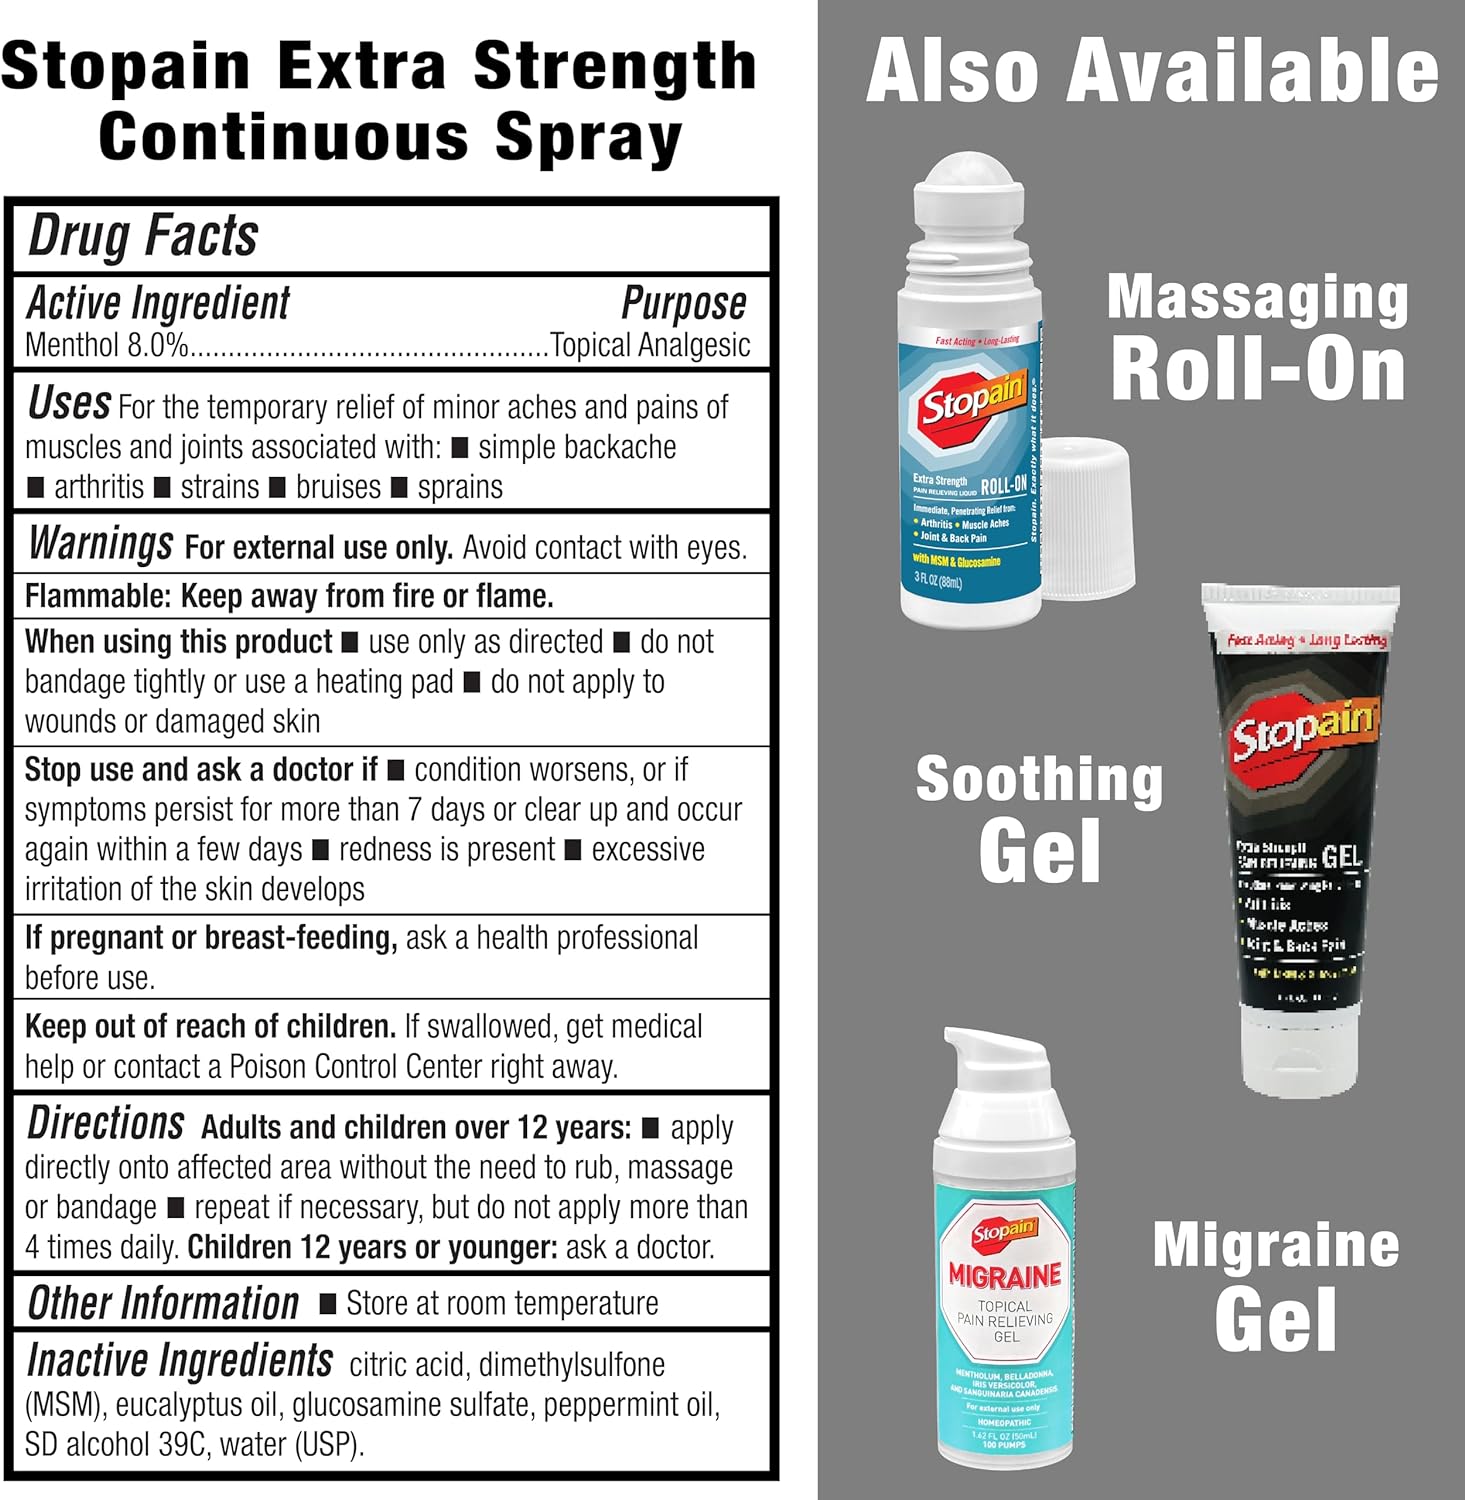 Stopain Pain Relief Spray 4oz (2 Pack) USA Made, Max Strength Fast Acting with MSM, Glucosamine, Menthol for Arthritis, Lower Back, Neck, HSA FSA Approved Topical Analgesic Products : Health & Household